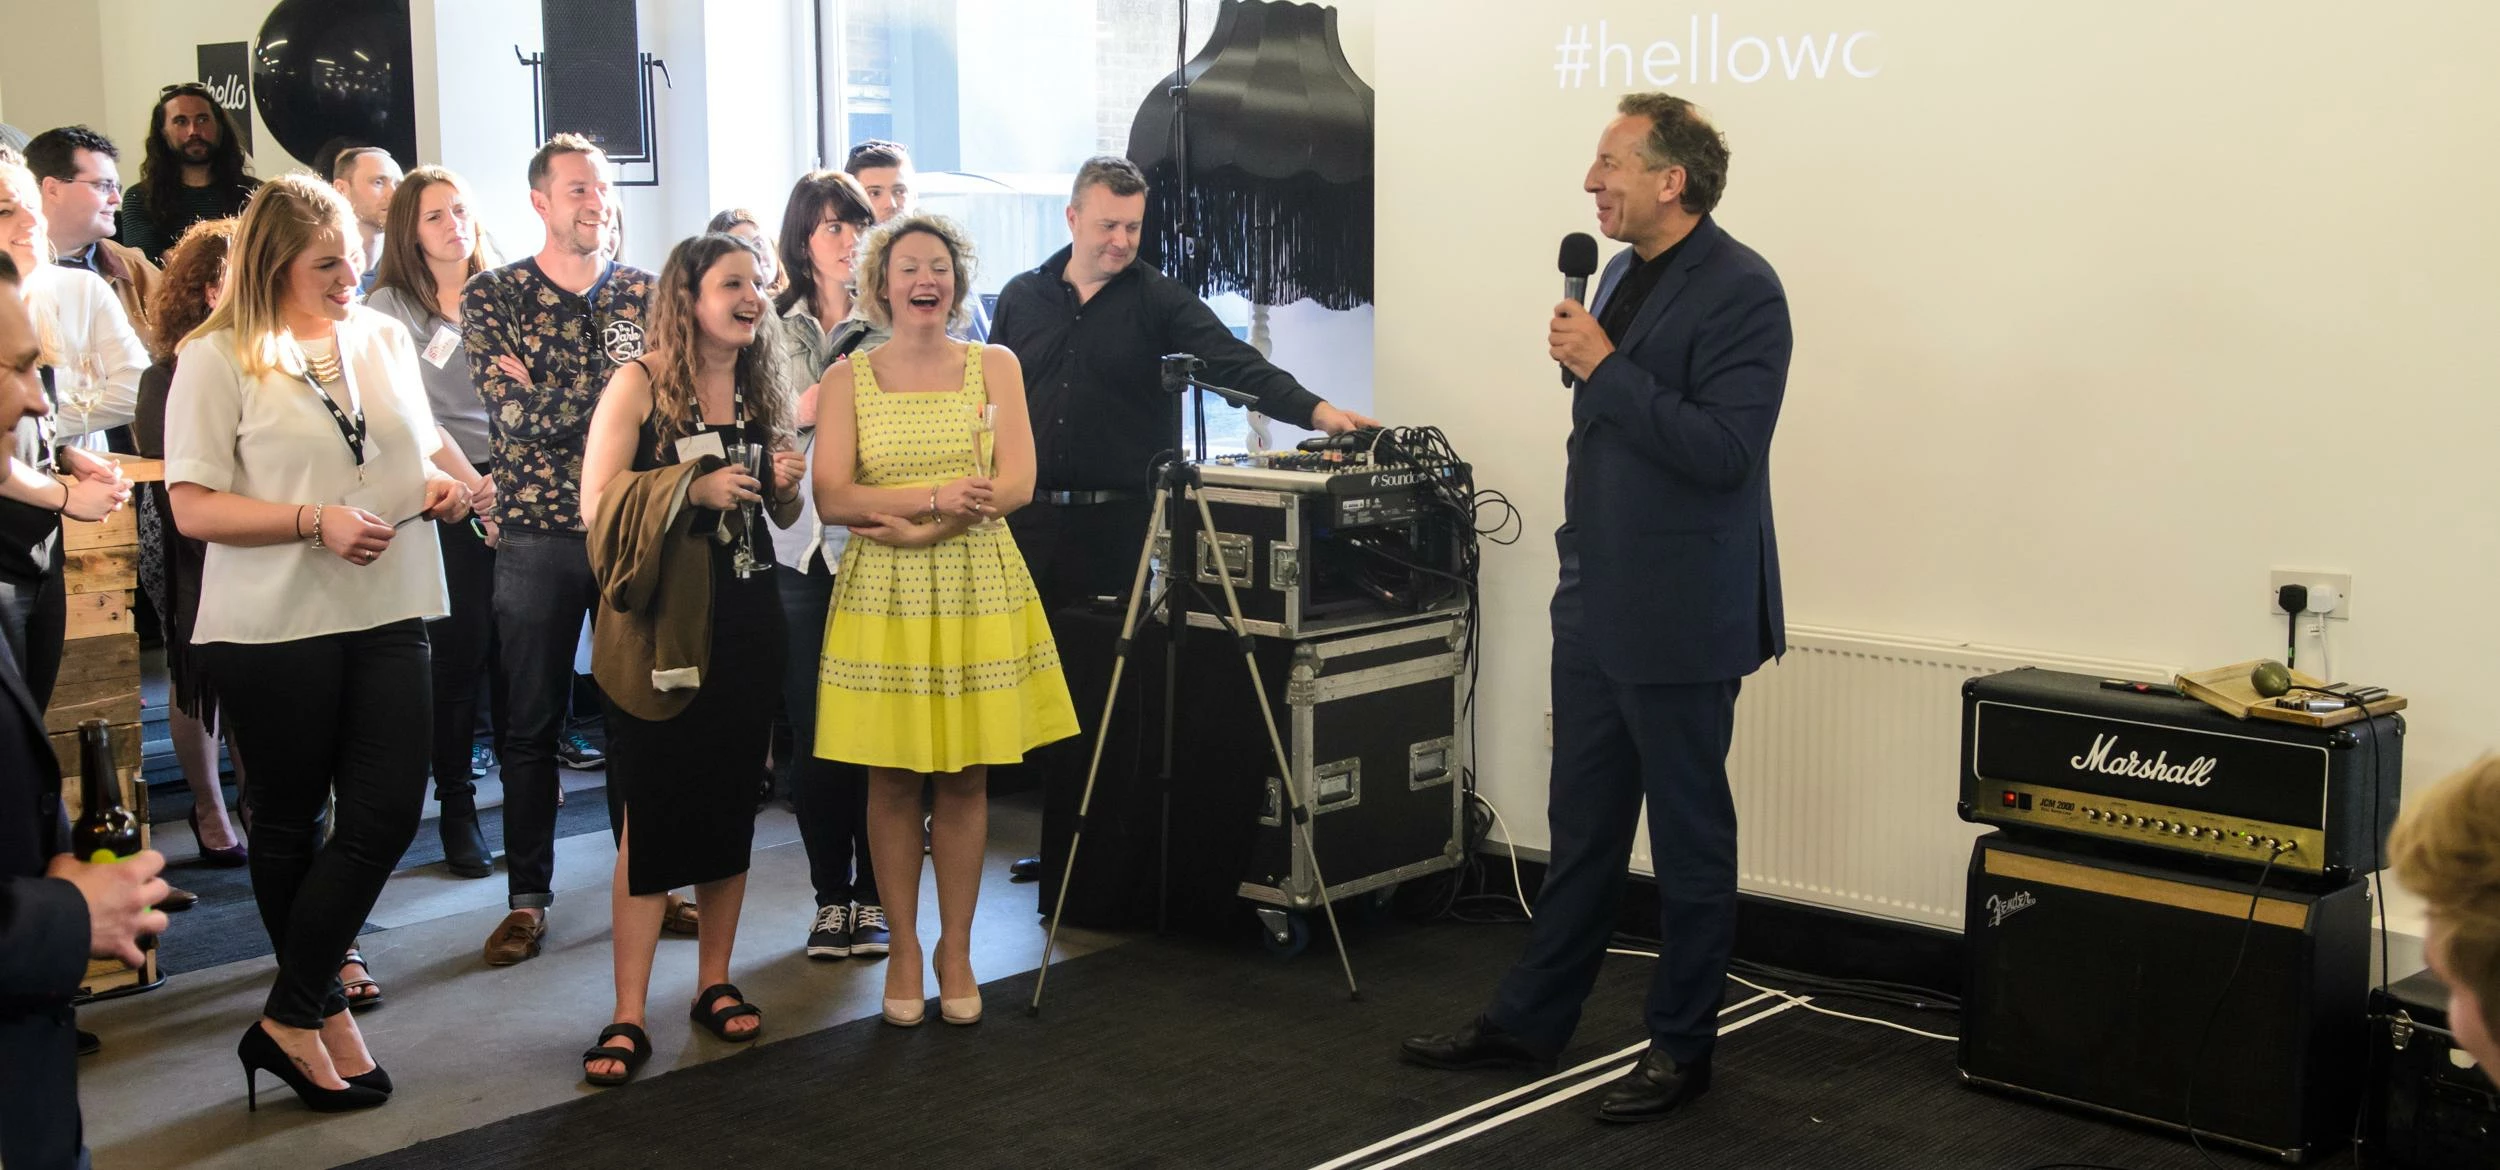 Hello Work Founder, Michael Ingall, welcomes guests to First Birthday Open House